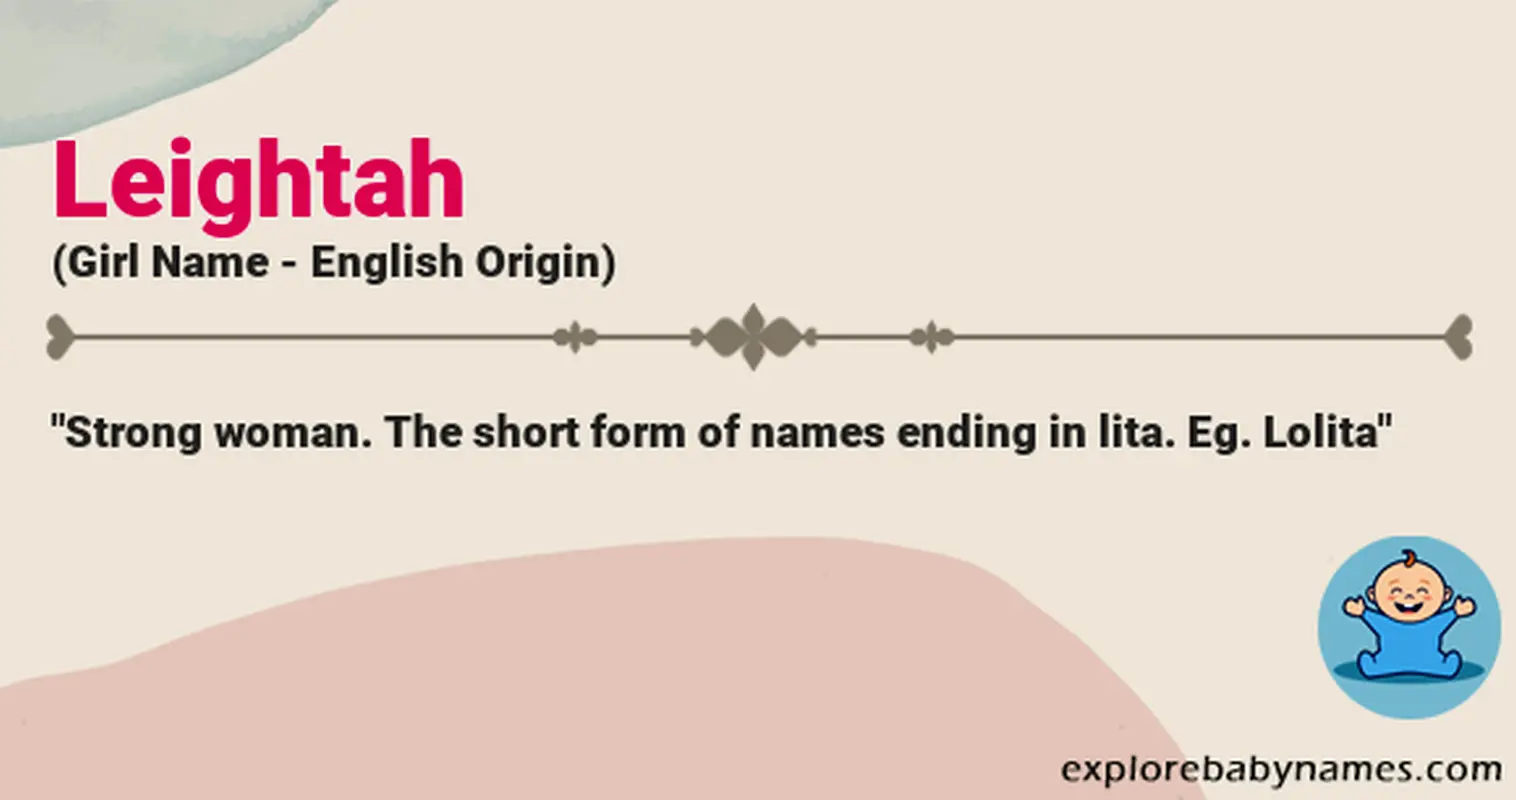 Meaning of Leightah